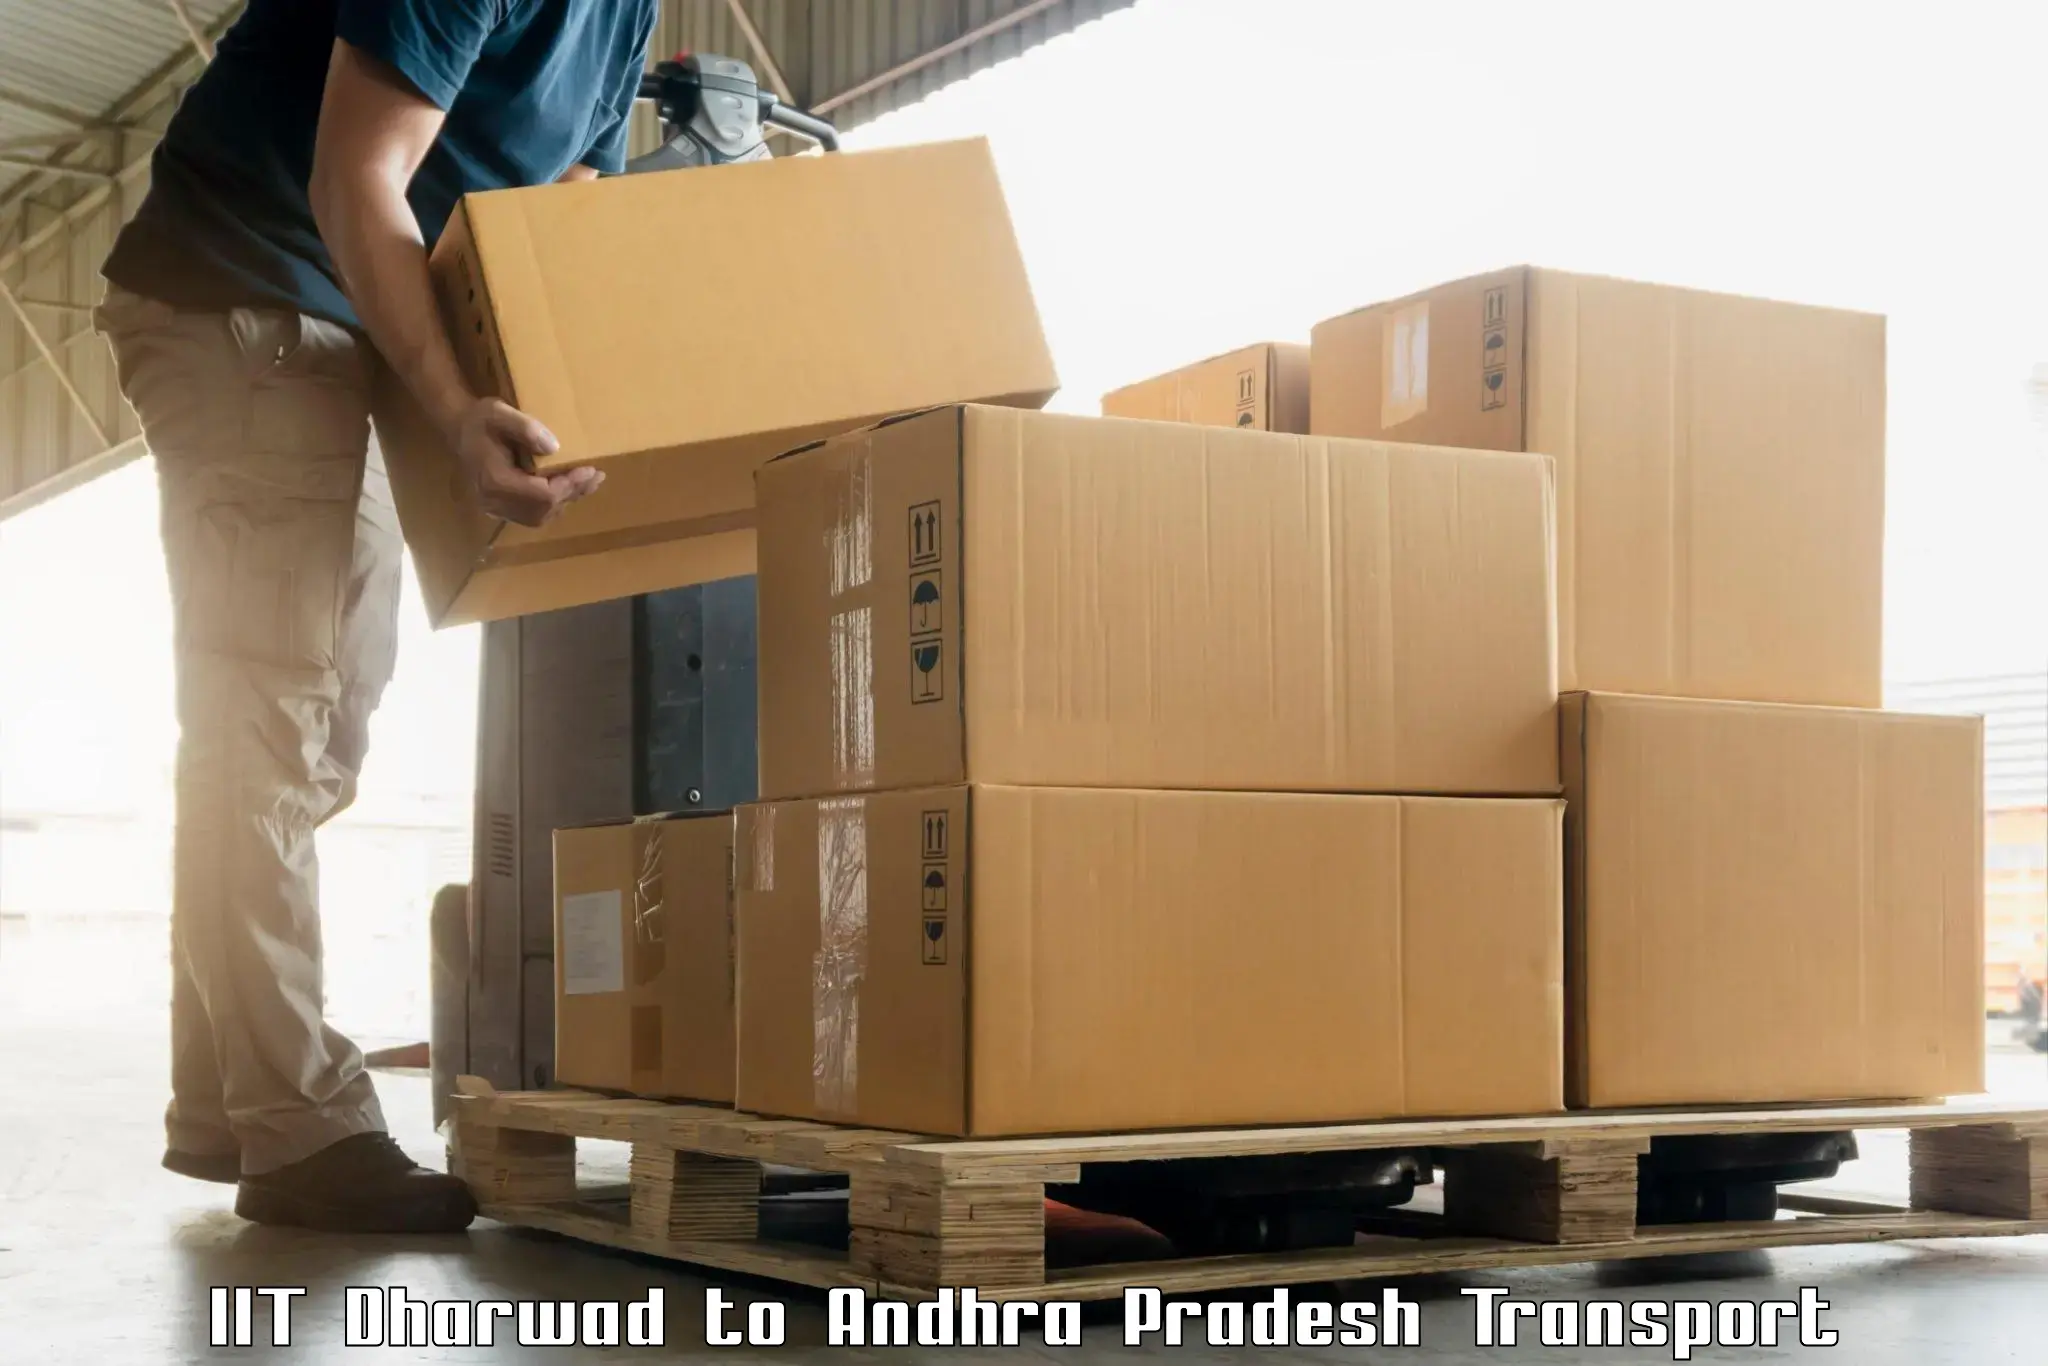 Daily parcel service transport in IIT Dharwad to Narsapur